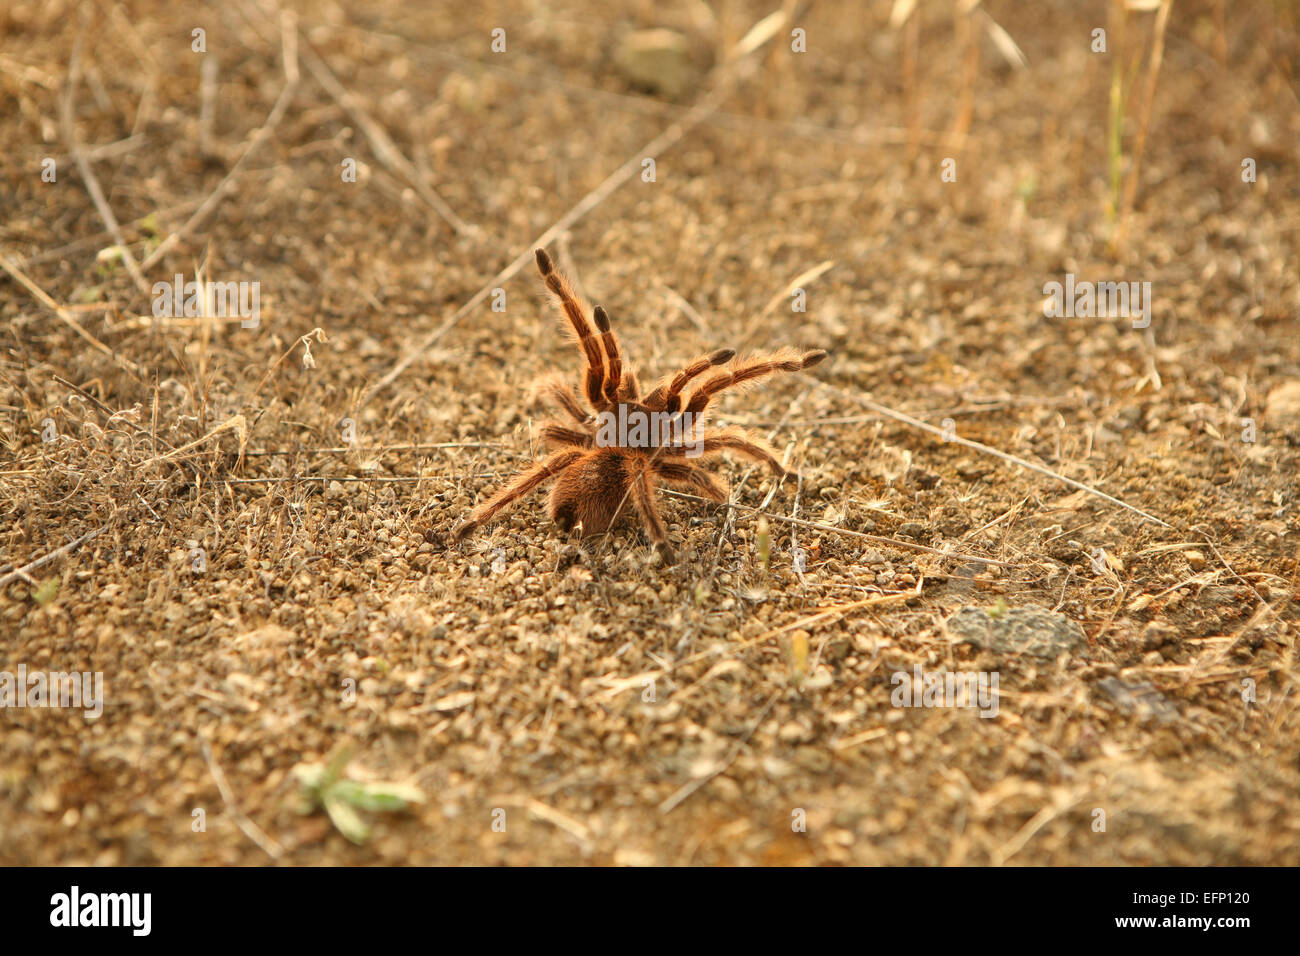 Tarantula in defensive pose, seen from behind Stock Photo